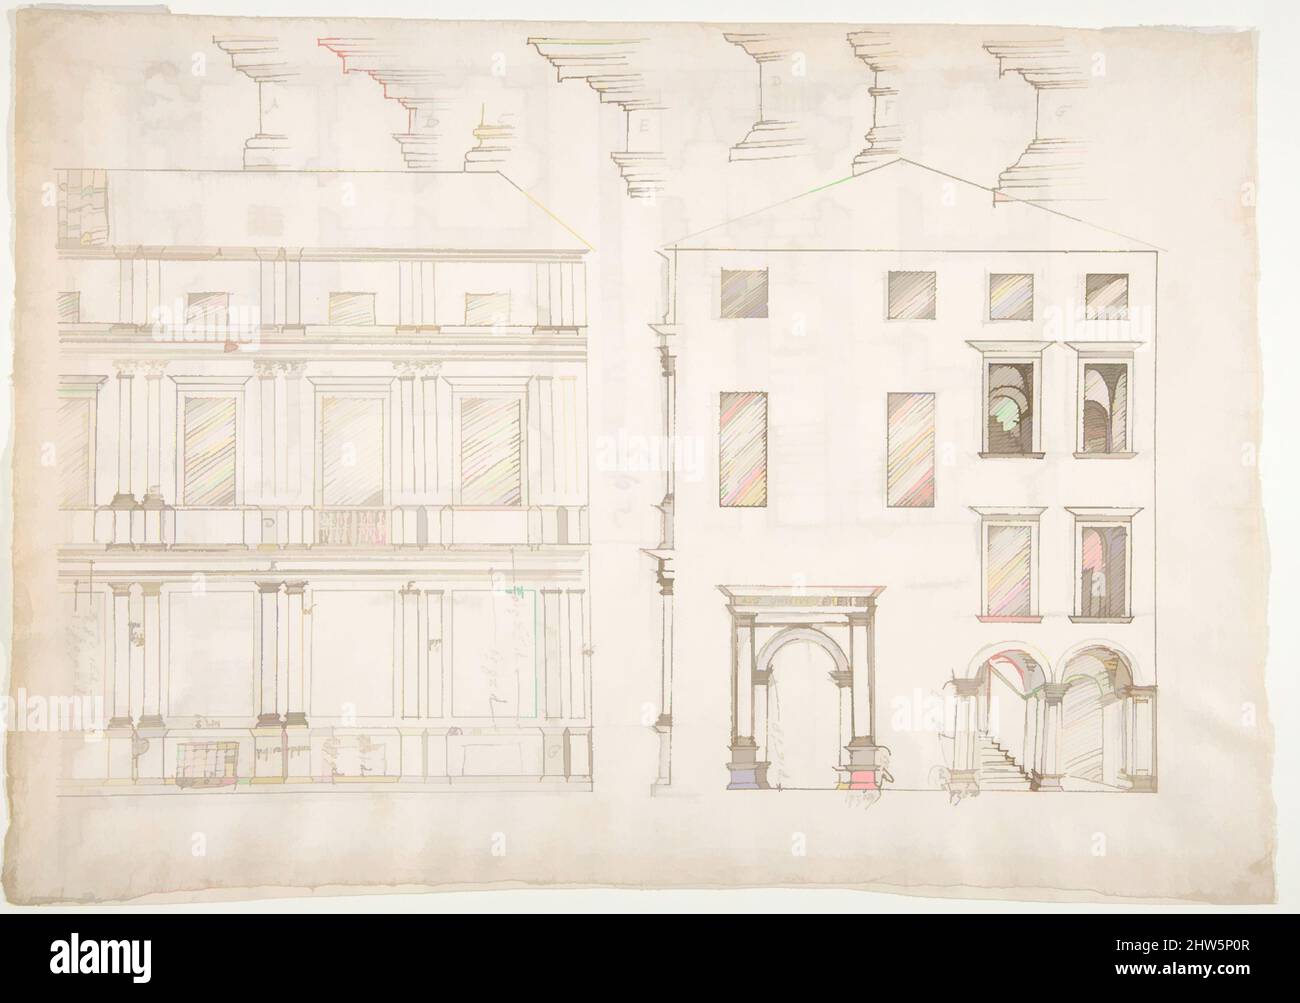 Art inspired by Villa Farnesina, Stables, half front elevation and end elevation (recto) Palazzo Salviati-Adimari, plan (verso), early to mid-16th century, Dark brown ink, black chalk, ink wash, and incised lines, sheet: 9 5/8 x 13 9/16 in. (24.5 x 34.5 cm), Drawings, Classic works modernized by Artotop with a splash of modernity. Shapes, color and value, eye-catching visual impact on art. Emotions through freedom of artworks in a contemporary way. A timeless message pursuing a wildly creative new direction. Artists turning to the digital medium and creating the Artotop NFT Stock Photo